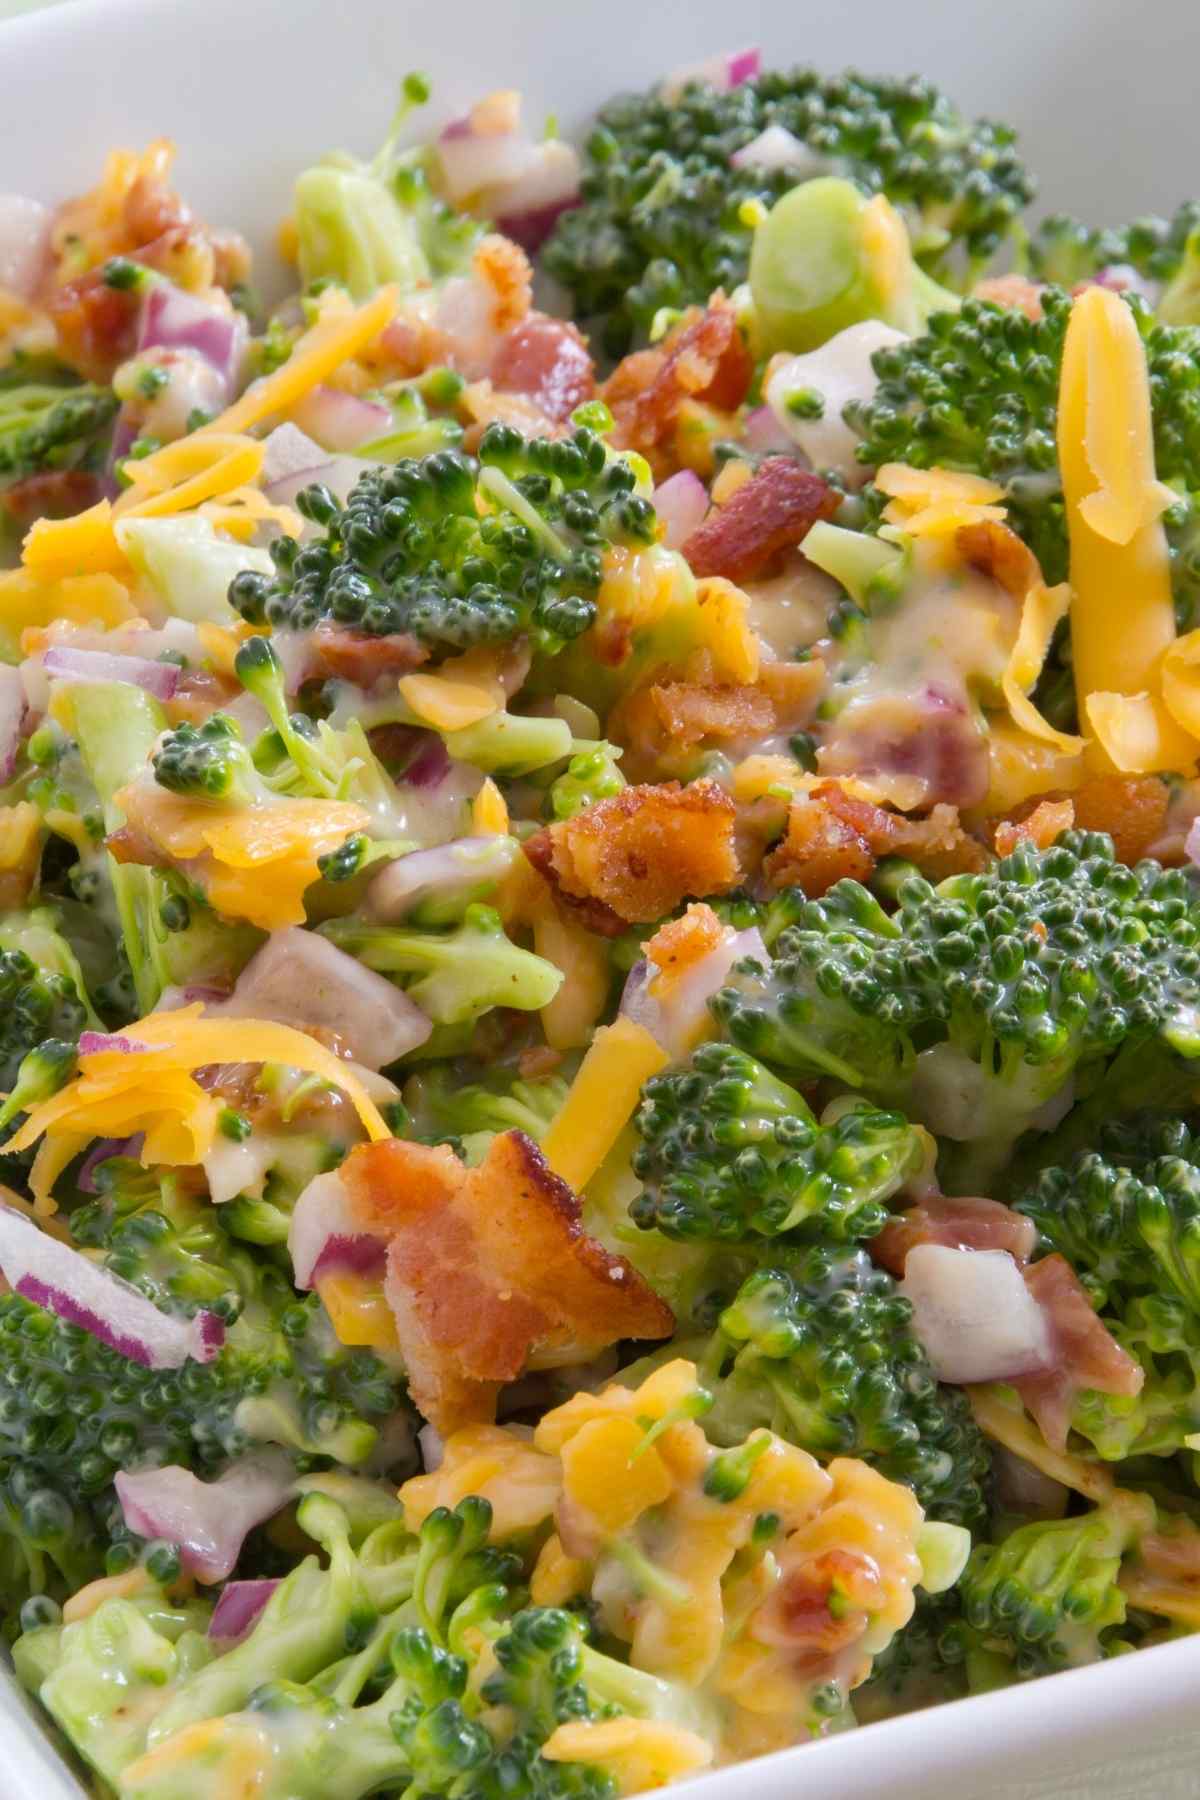 Switch up your salad game with this crunchy Broccoli Salad With Bacon. The raw broccoli florets pair beautifully with tart dried cranberries, sharp cheddar cheese, salty sunflower seeds, and smokey bacon tossed in a creamy dressing.